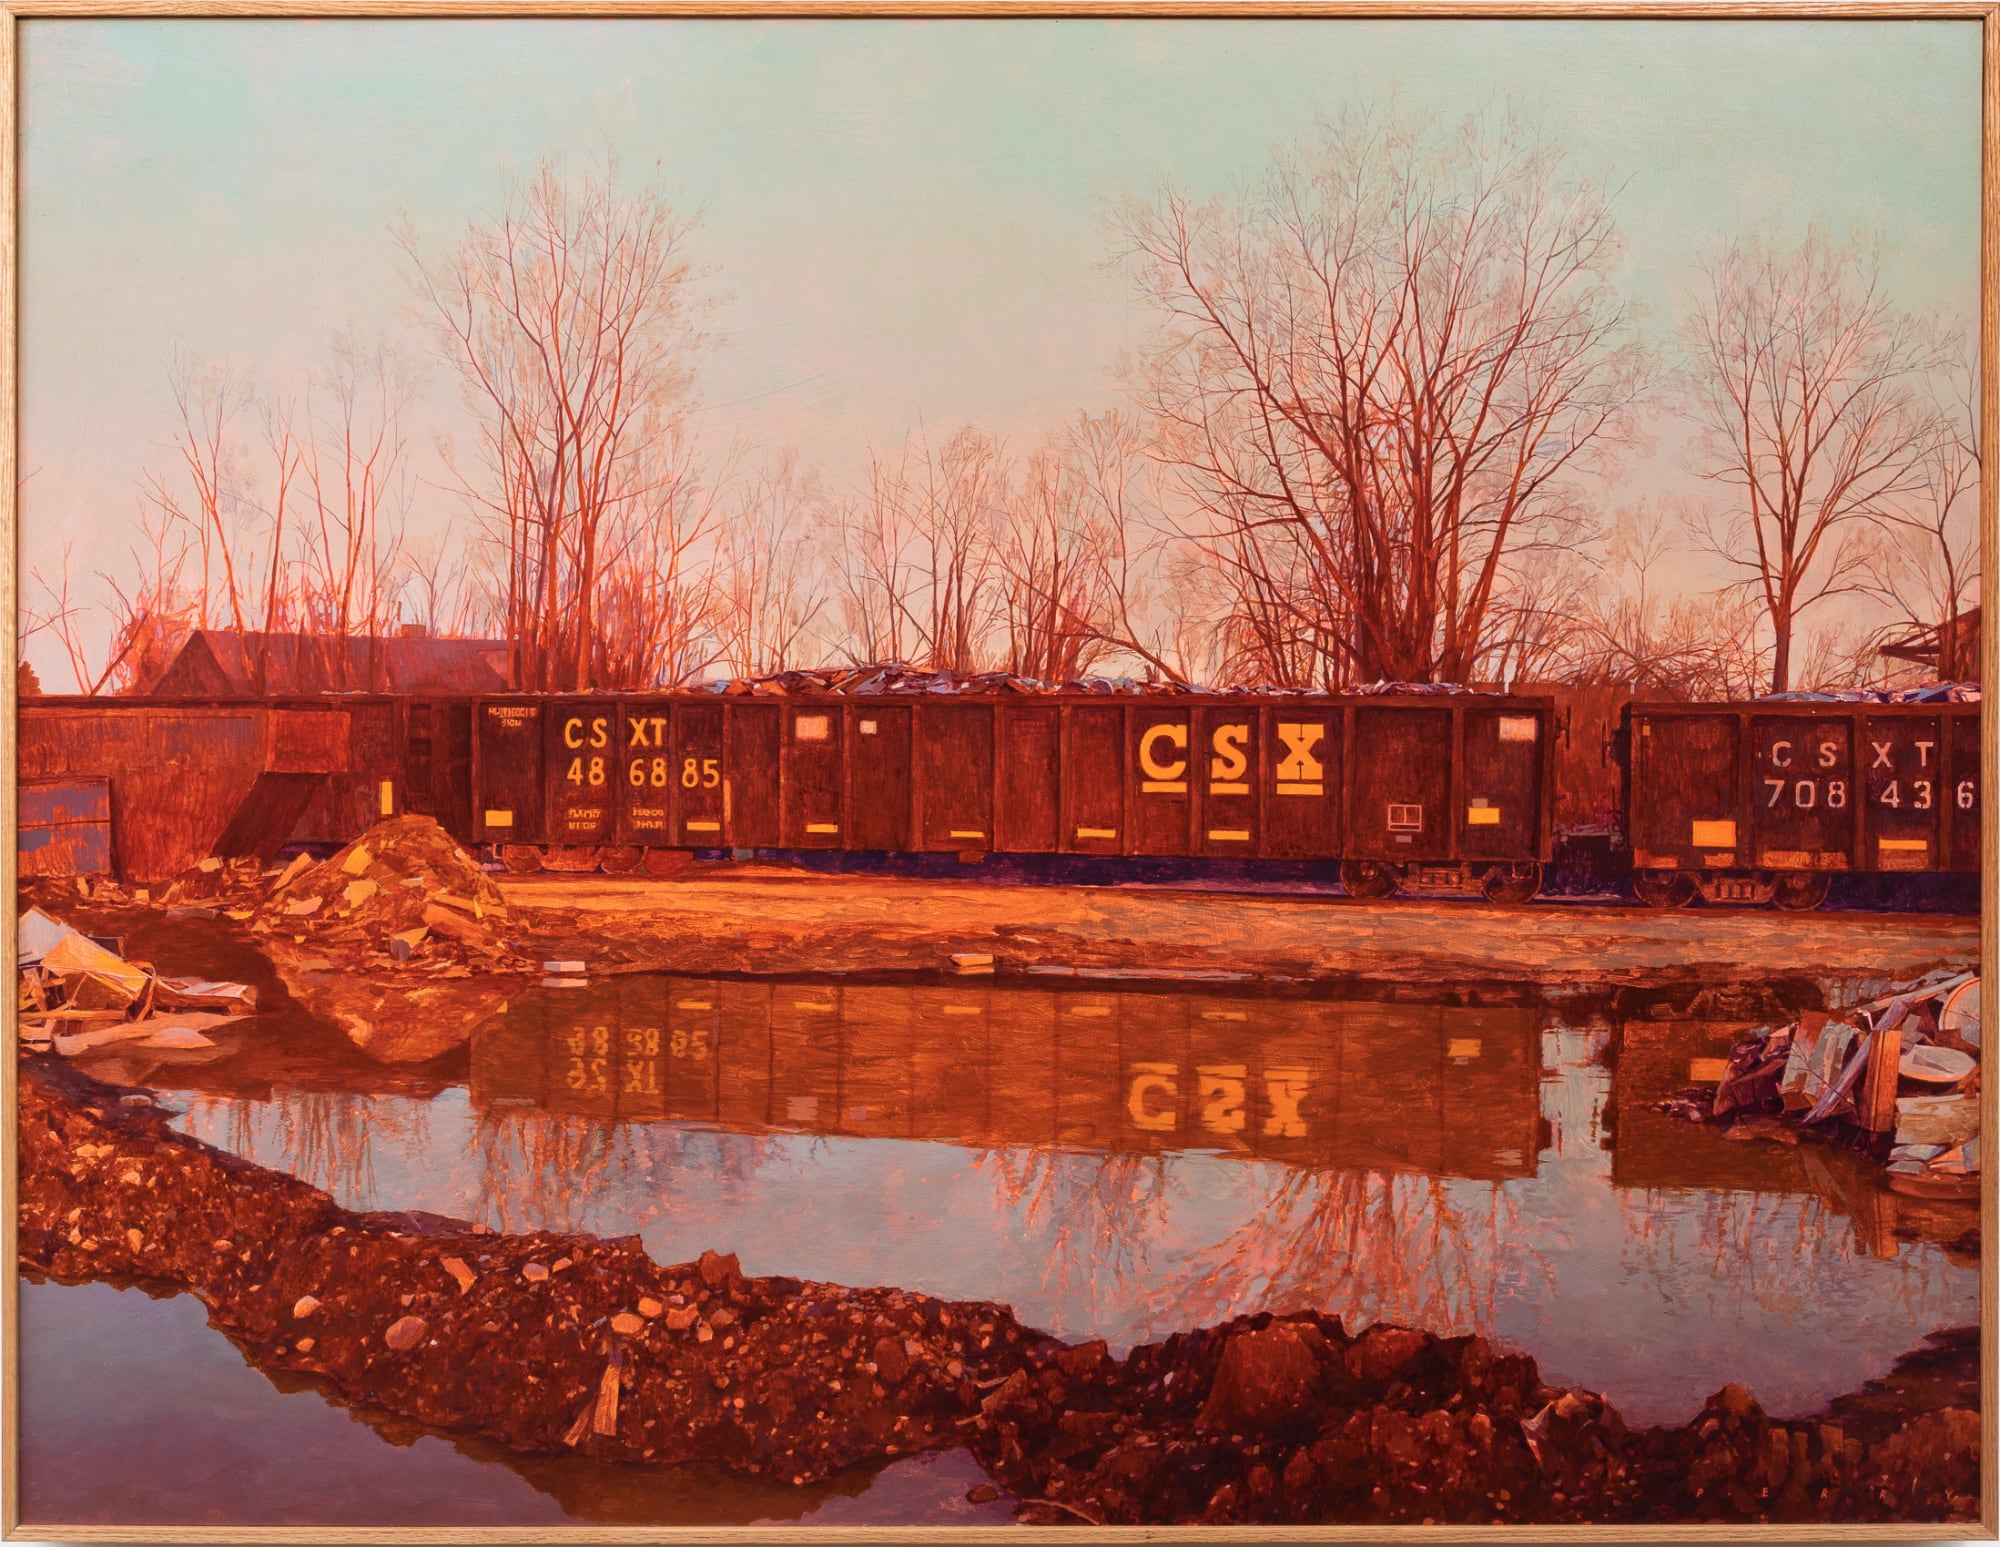 standing water is in the foreground with a rusty group of train cars in the back